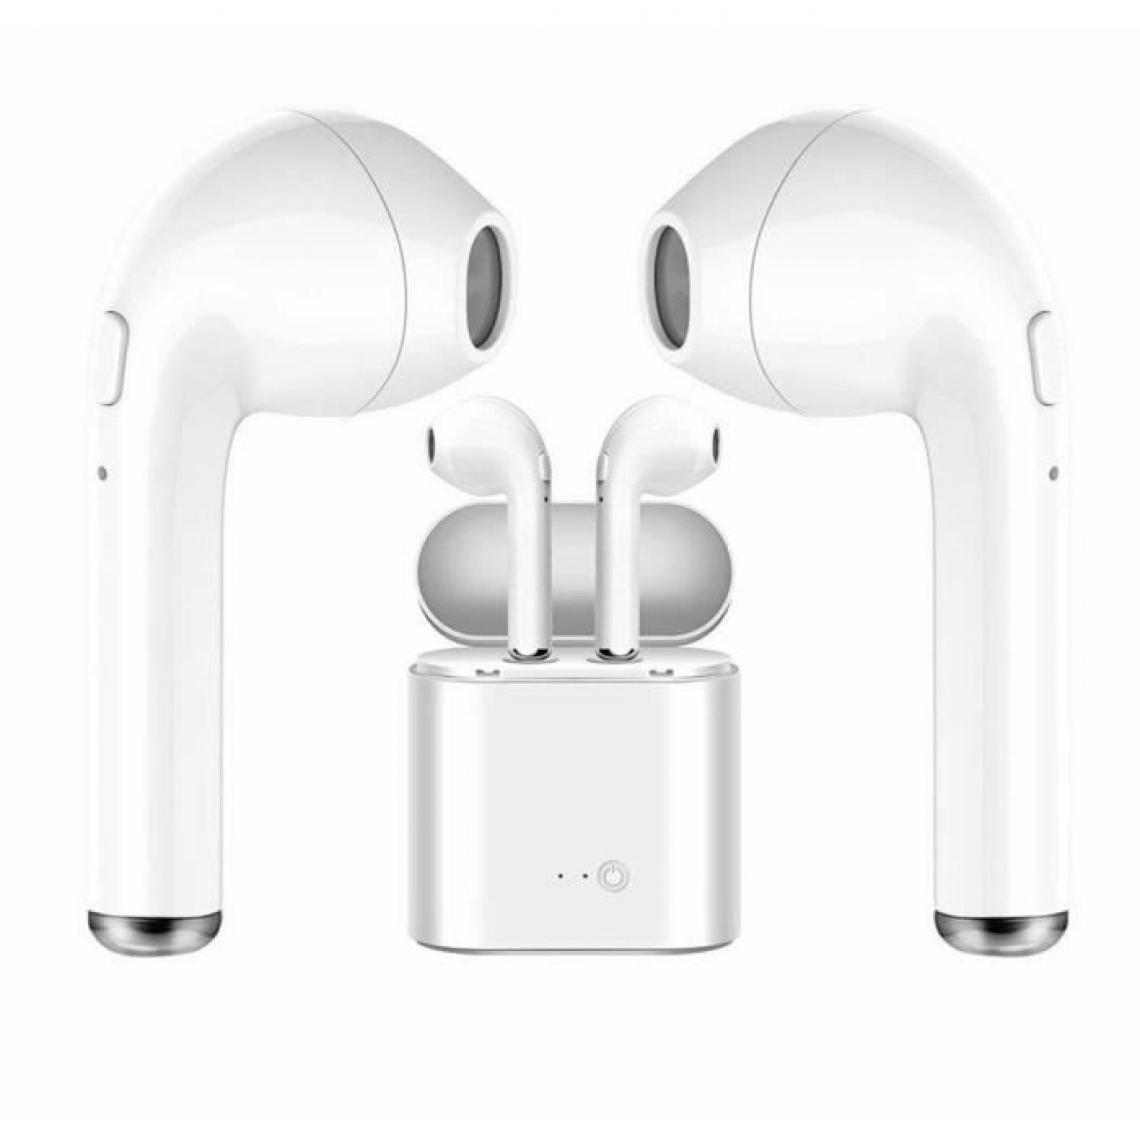 Inovalley - INOVALLEY CO3 W Ecouteurs stéréo bluetooth - Blanc - Ecouteurs intra-auriculaires